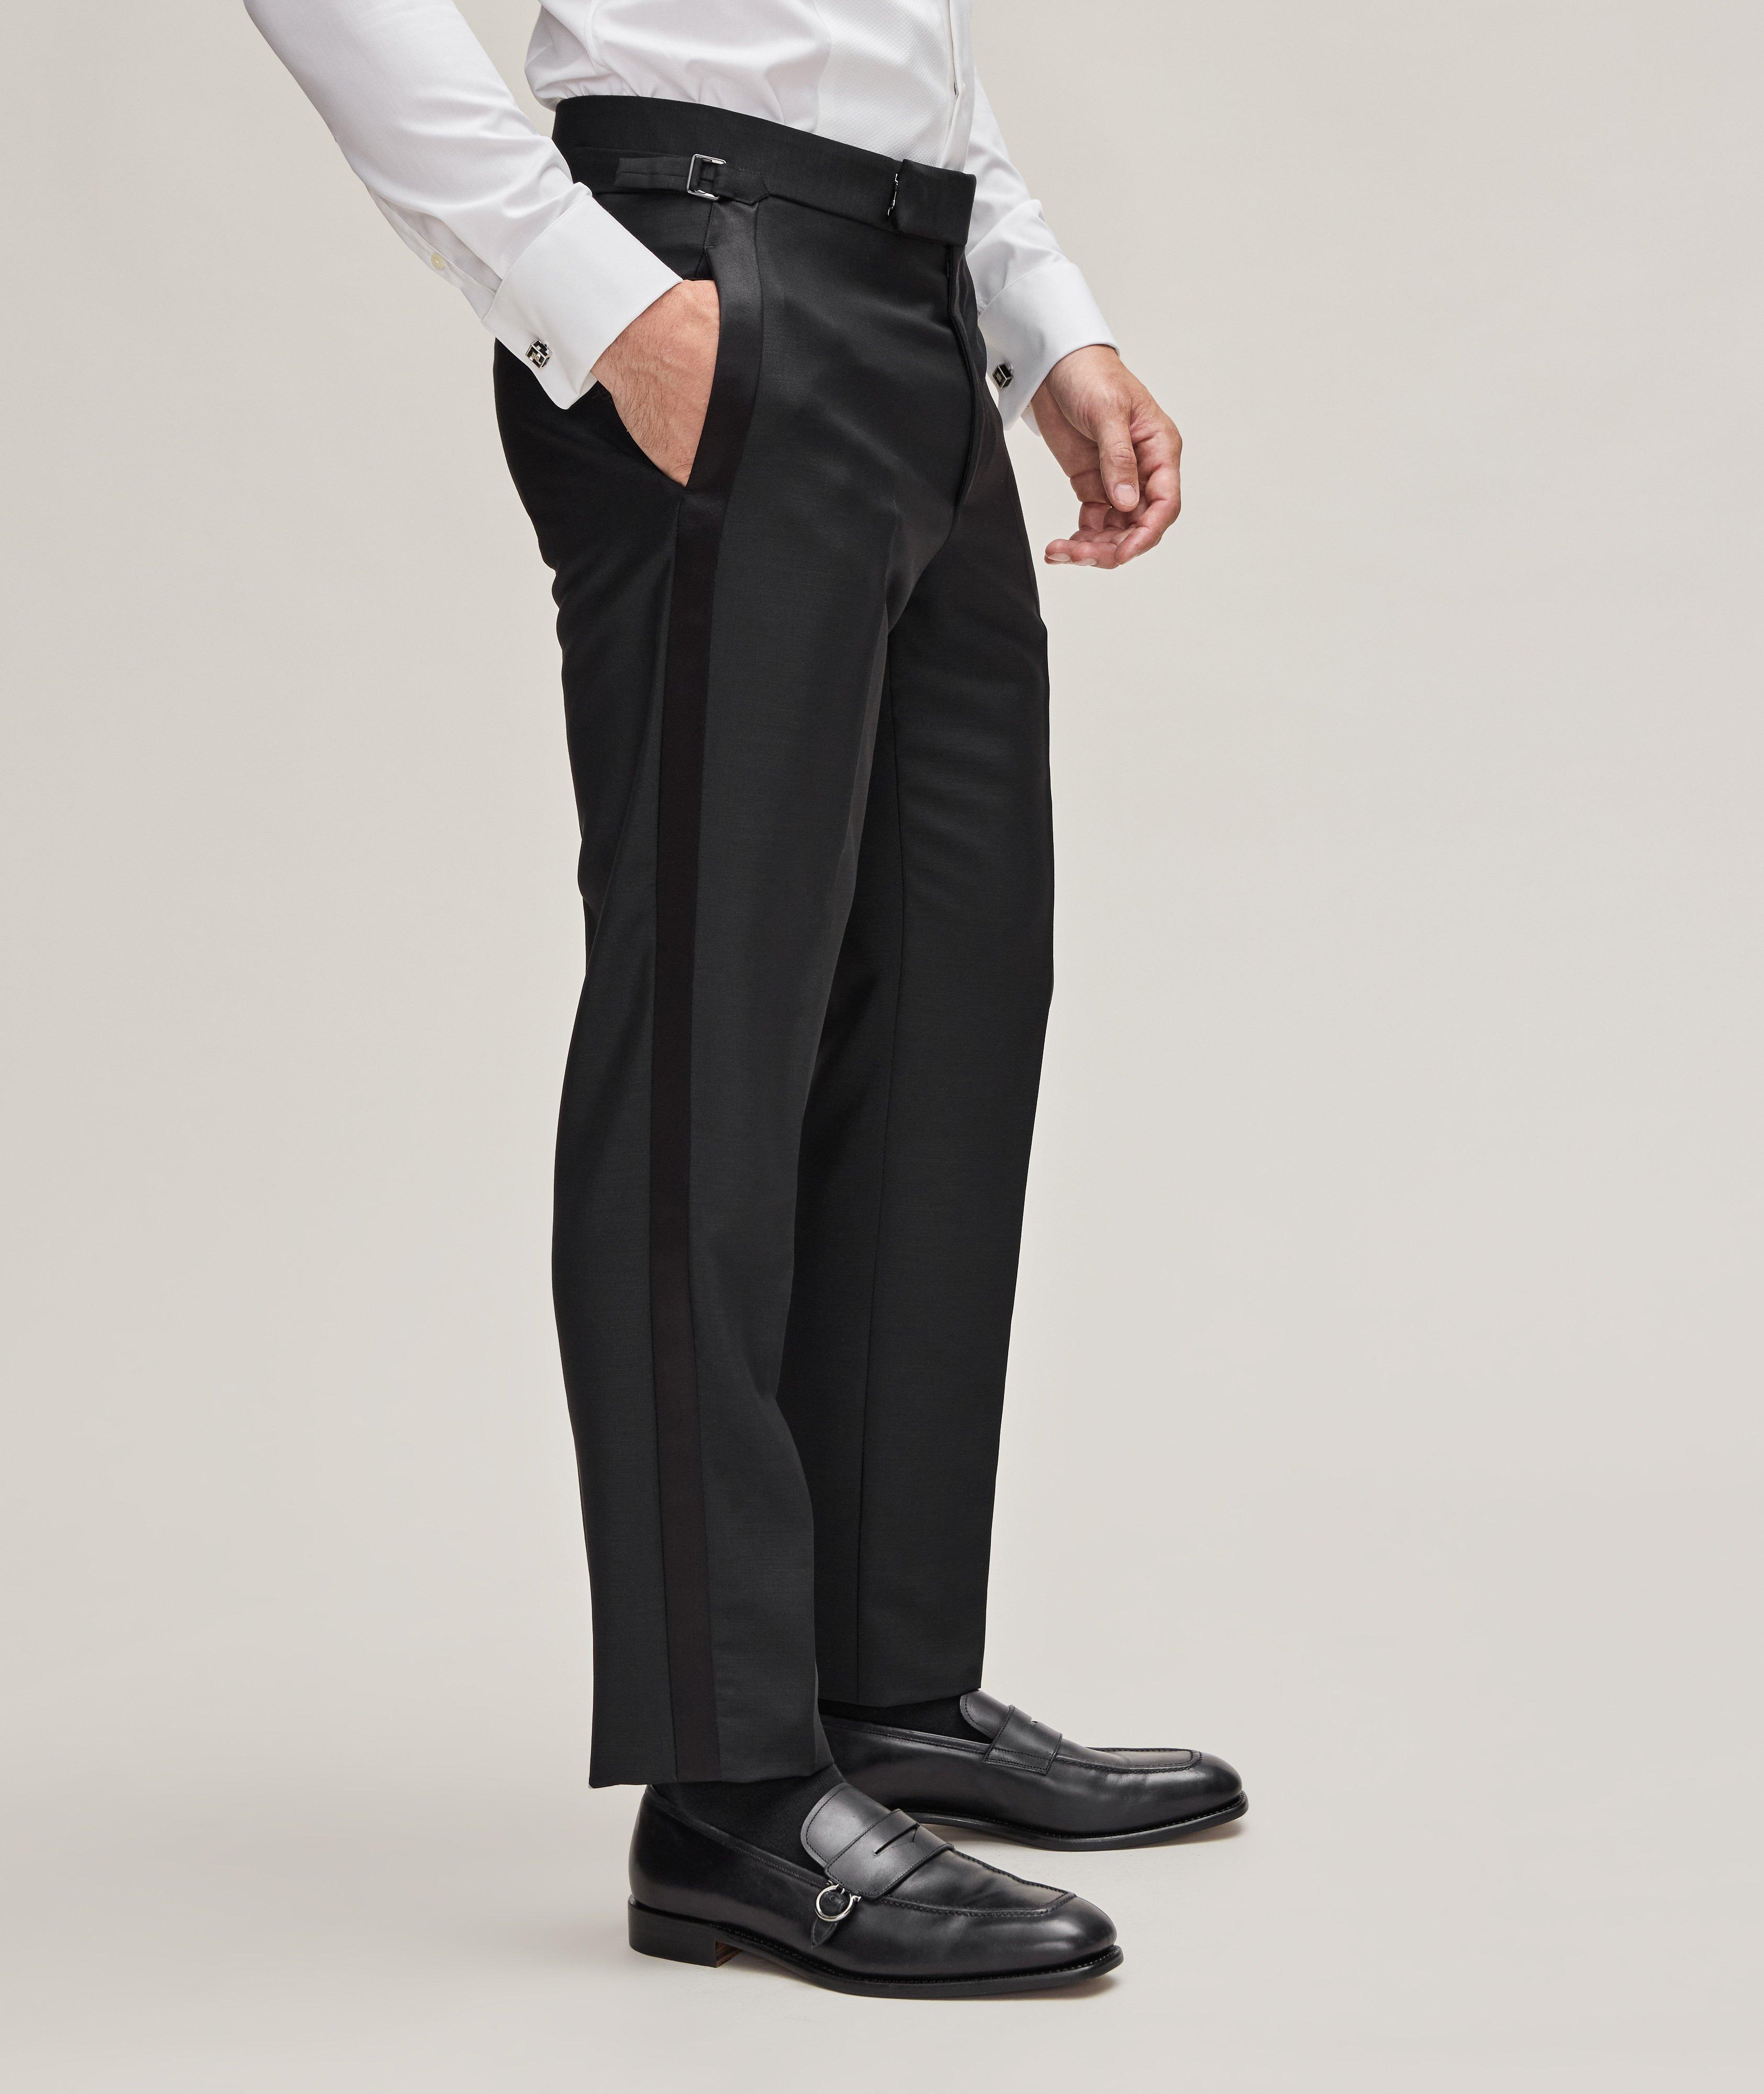 TOM FORD O'Connor Mohair Wool Formal Evening Pants